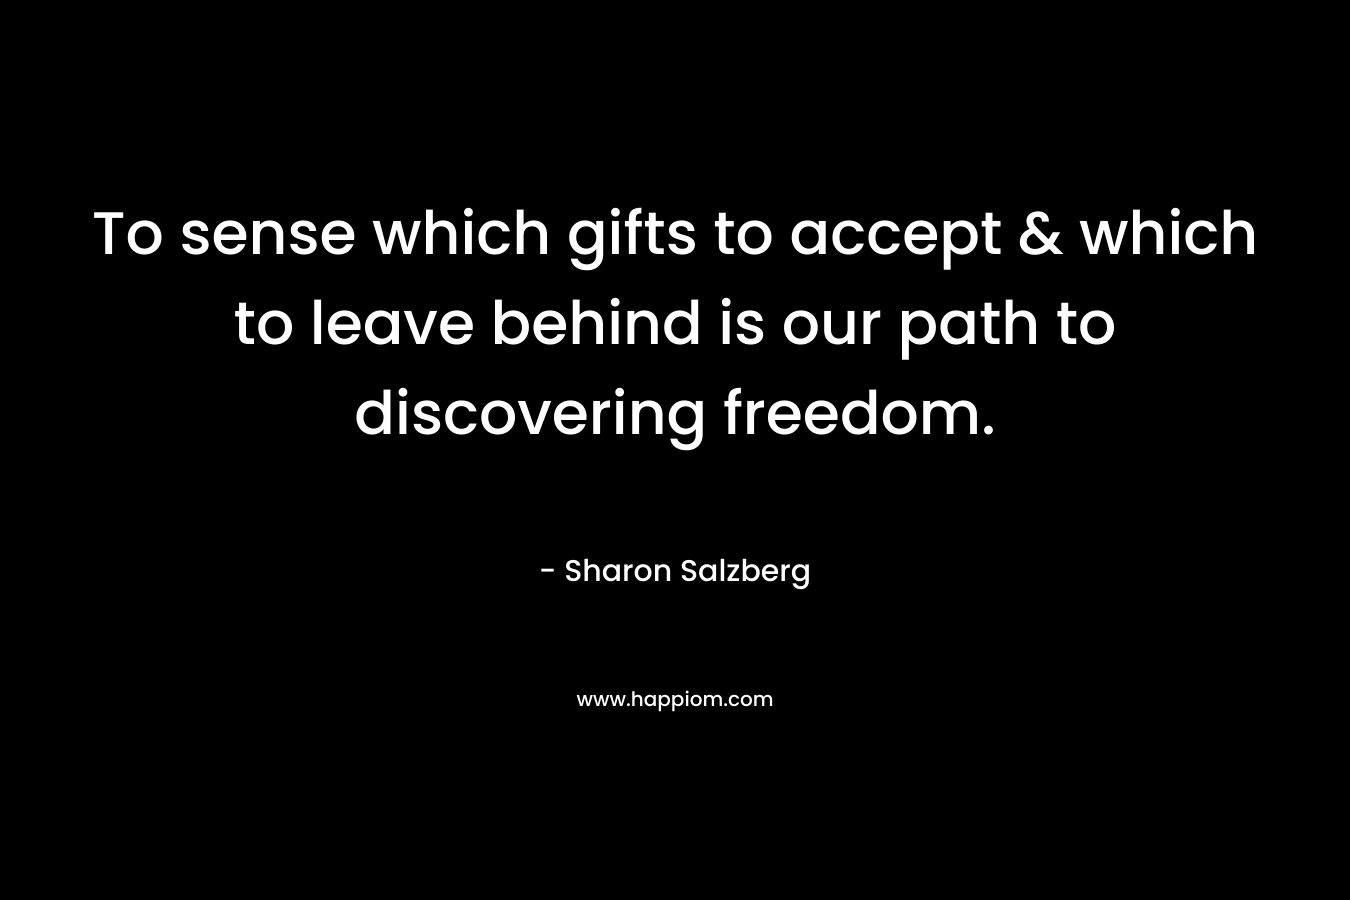 To sense which gifts to accept & which to leave behind is our path to discovering freedom.